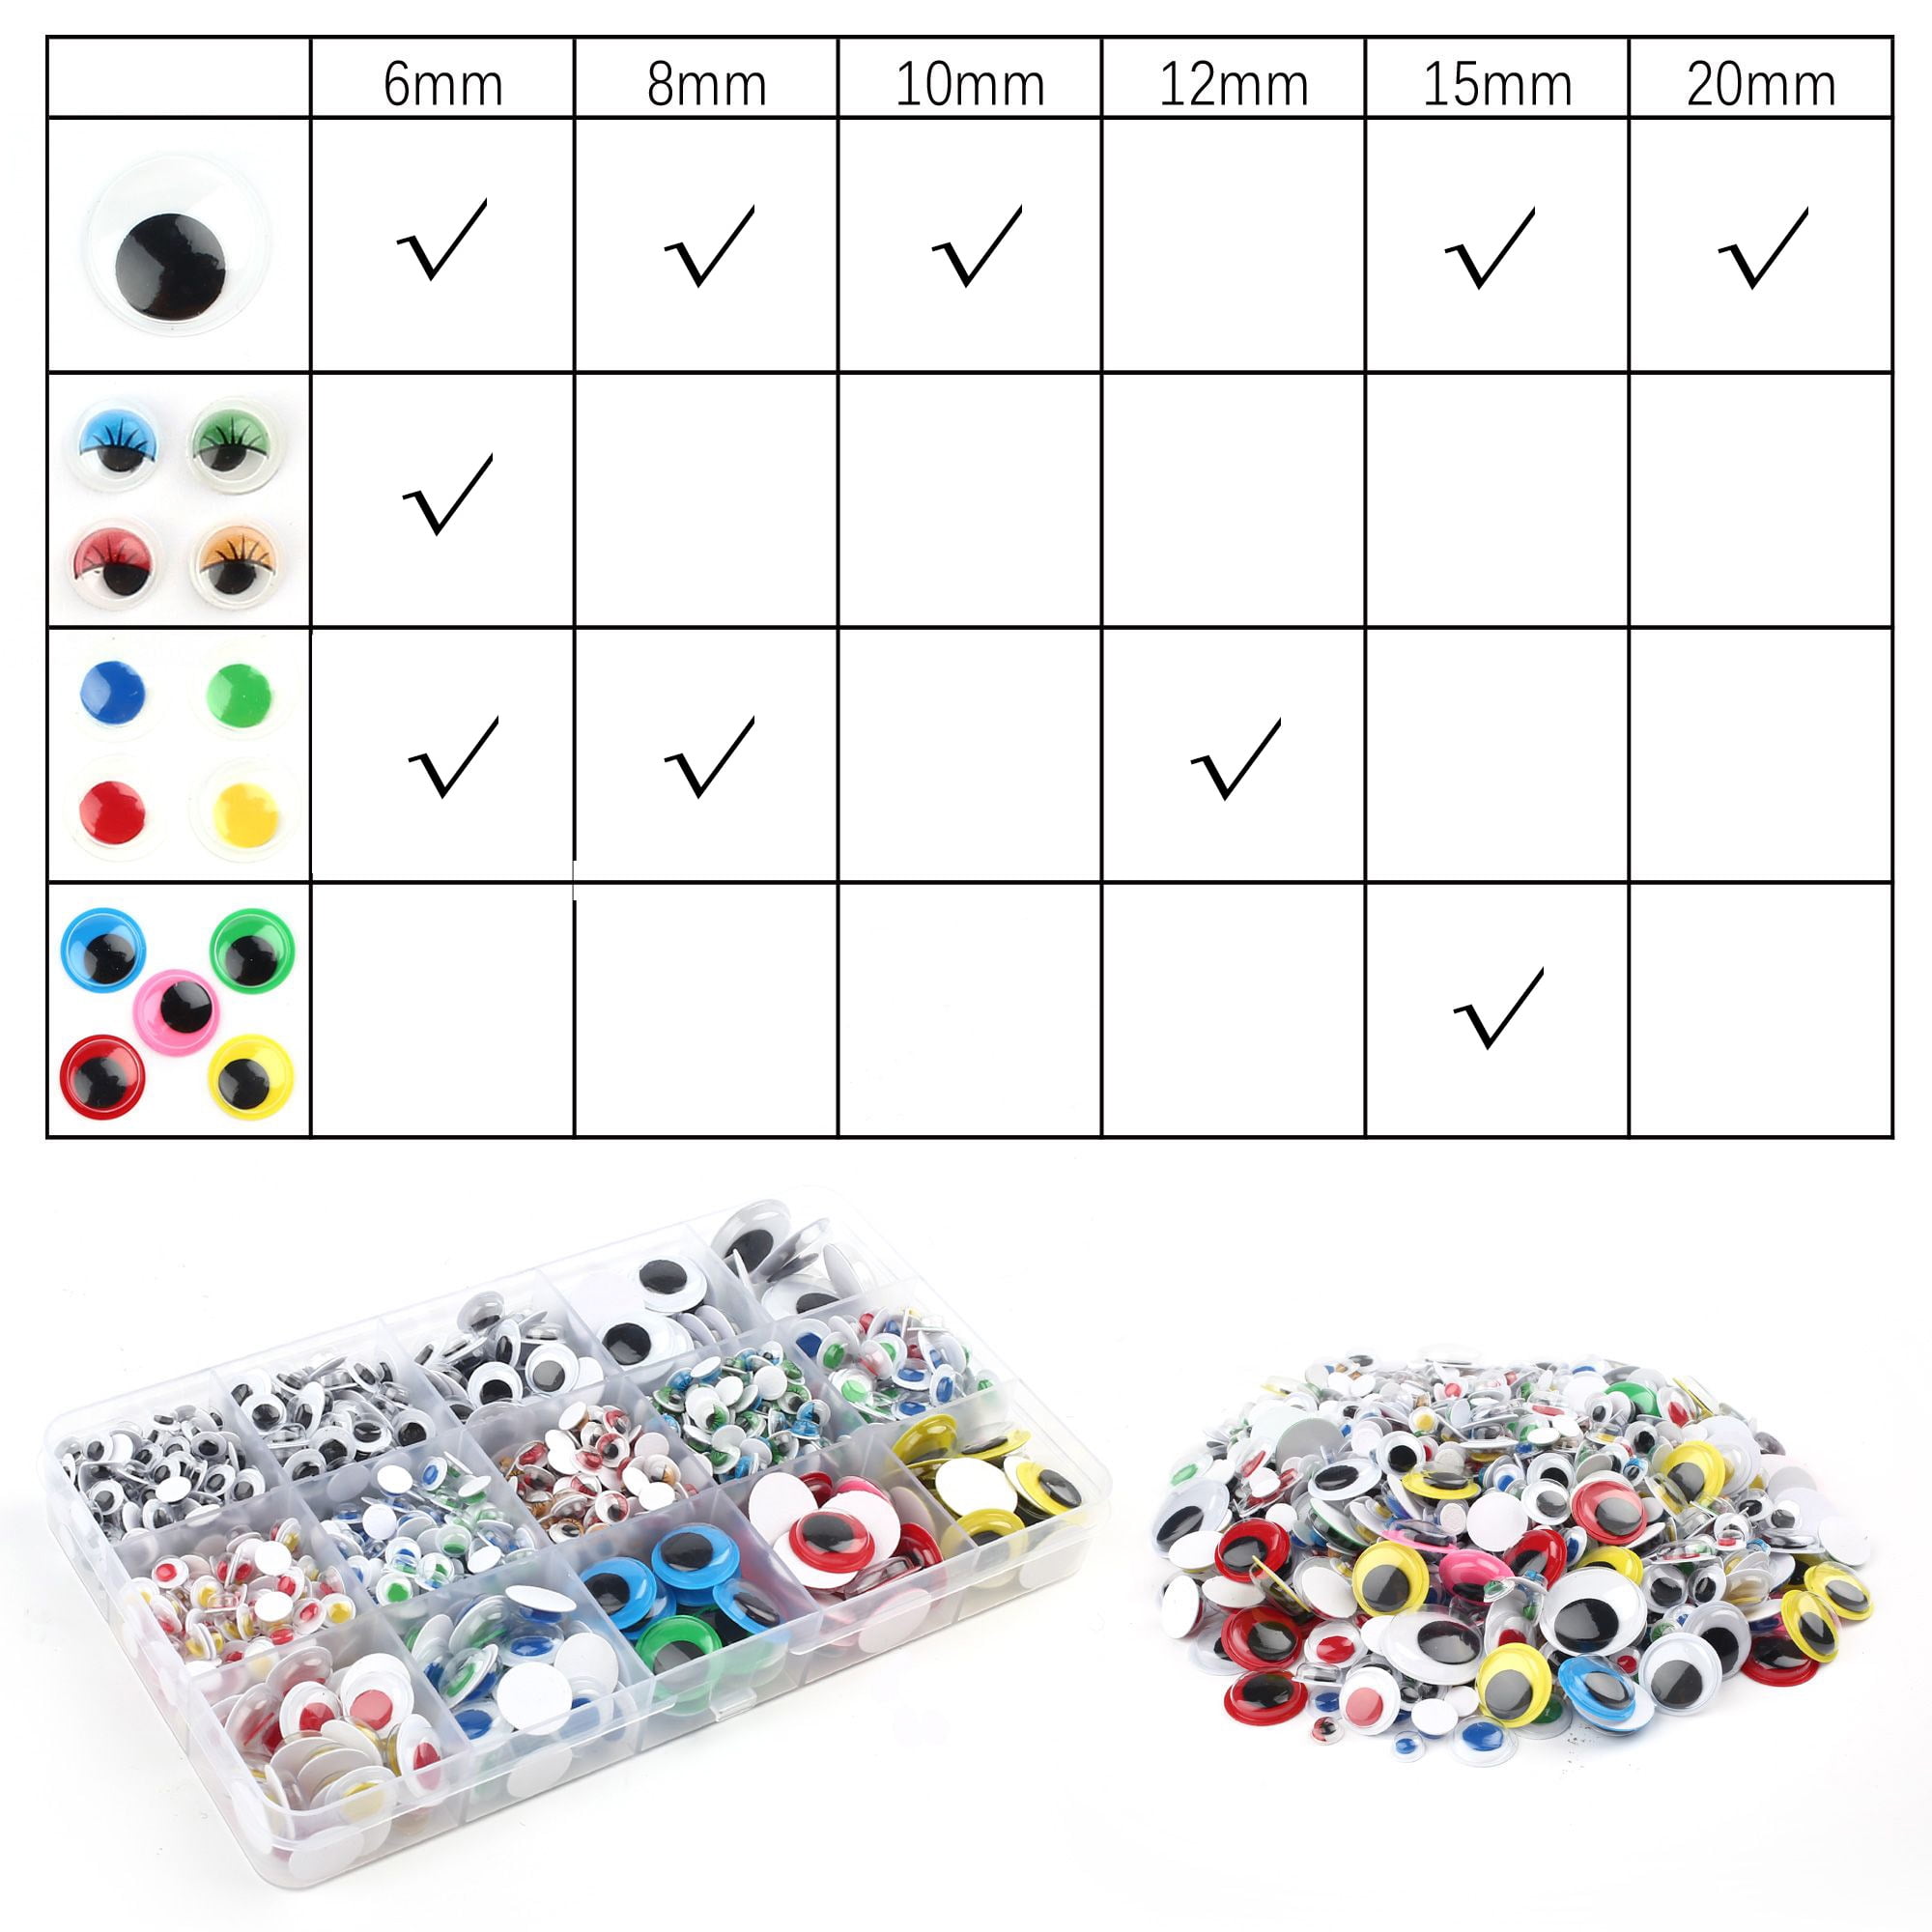 LotFancy 1100pcs Wiggle Googly Eyes for Crafts, Self-Adhesive Multi Colored  Assorted Sizes (6mm, 8mm, 10mm, 12mm, 15mm, 20mm), Google Eyes Stickers